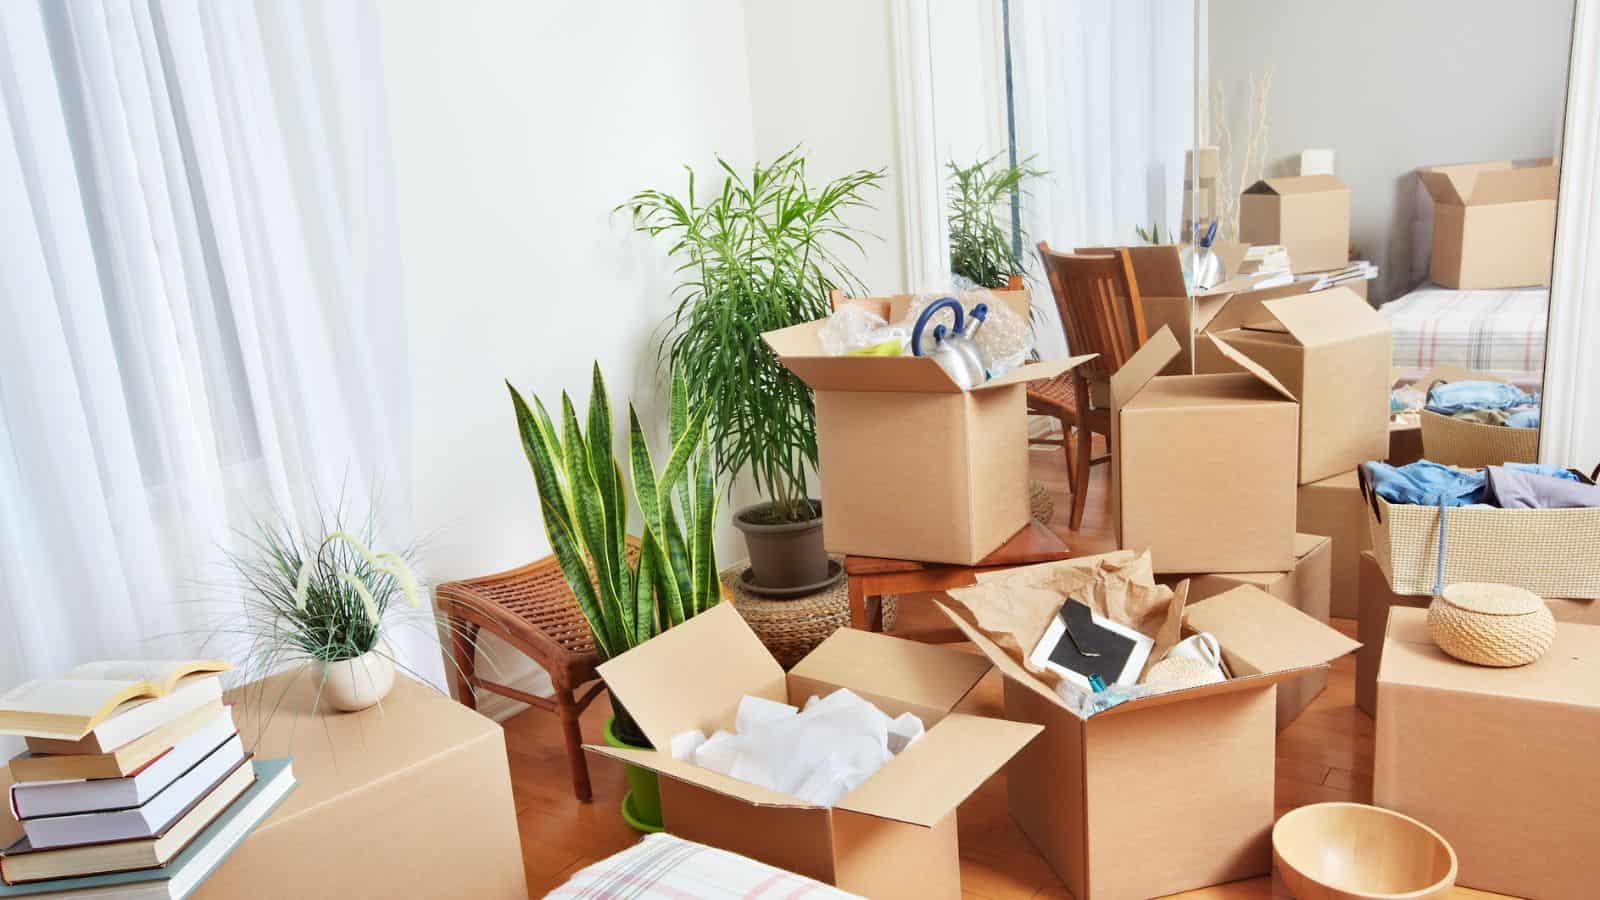 <p>With the amount of empty space it has, the basement has been the perfect place for many to keep storage boxes. This is especially true when the boxes are empty or when they contain items that are seldom used. By doing this, you avoid cluttering living areas and get a specialized space to organize small items.</p>